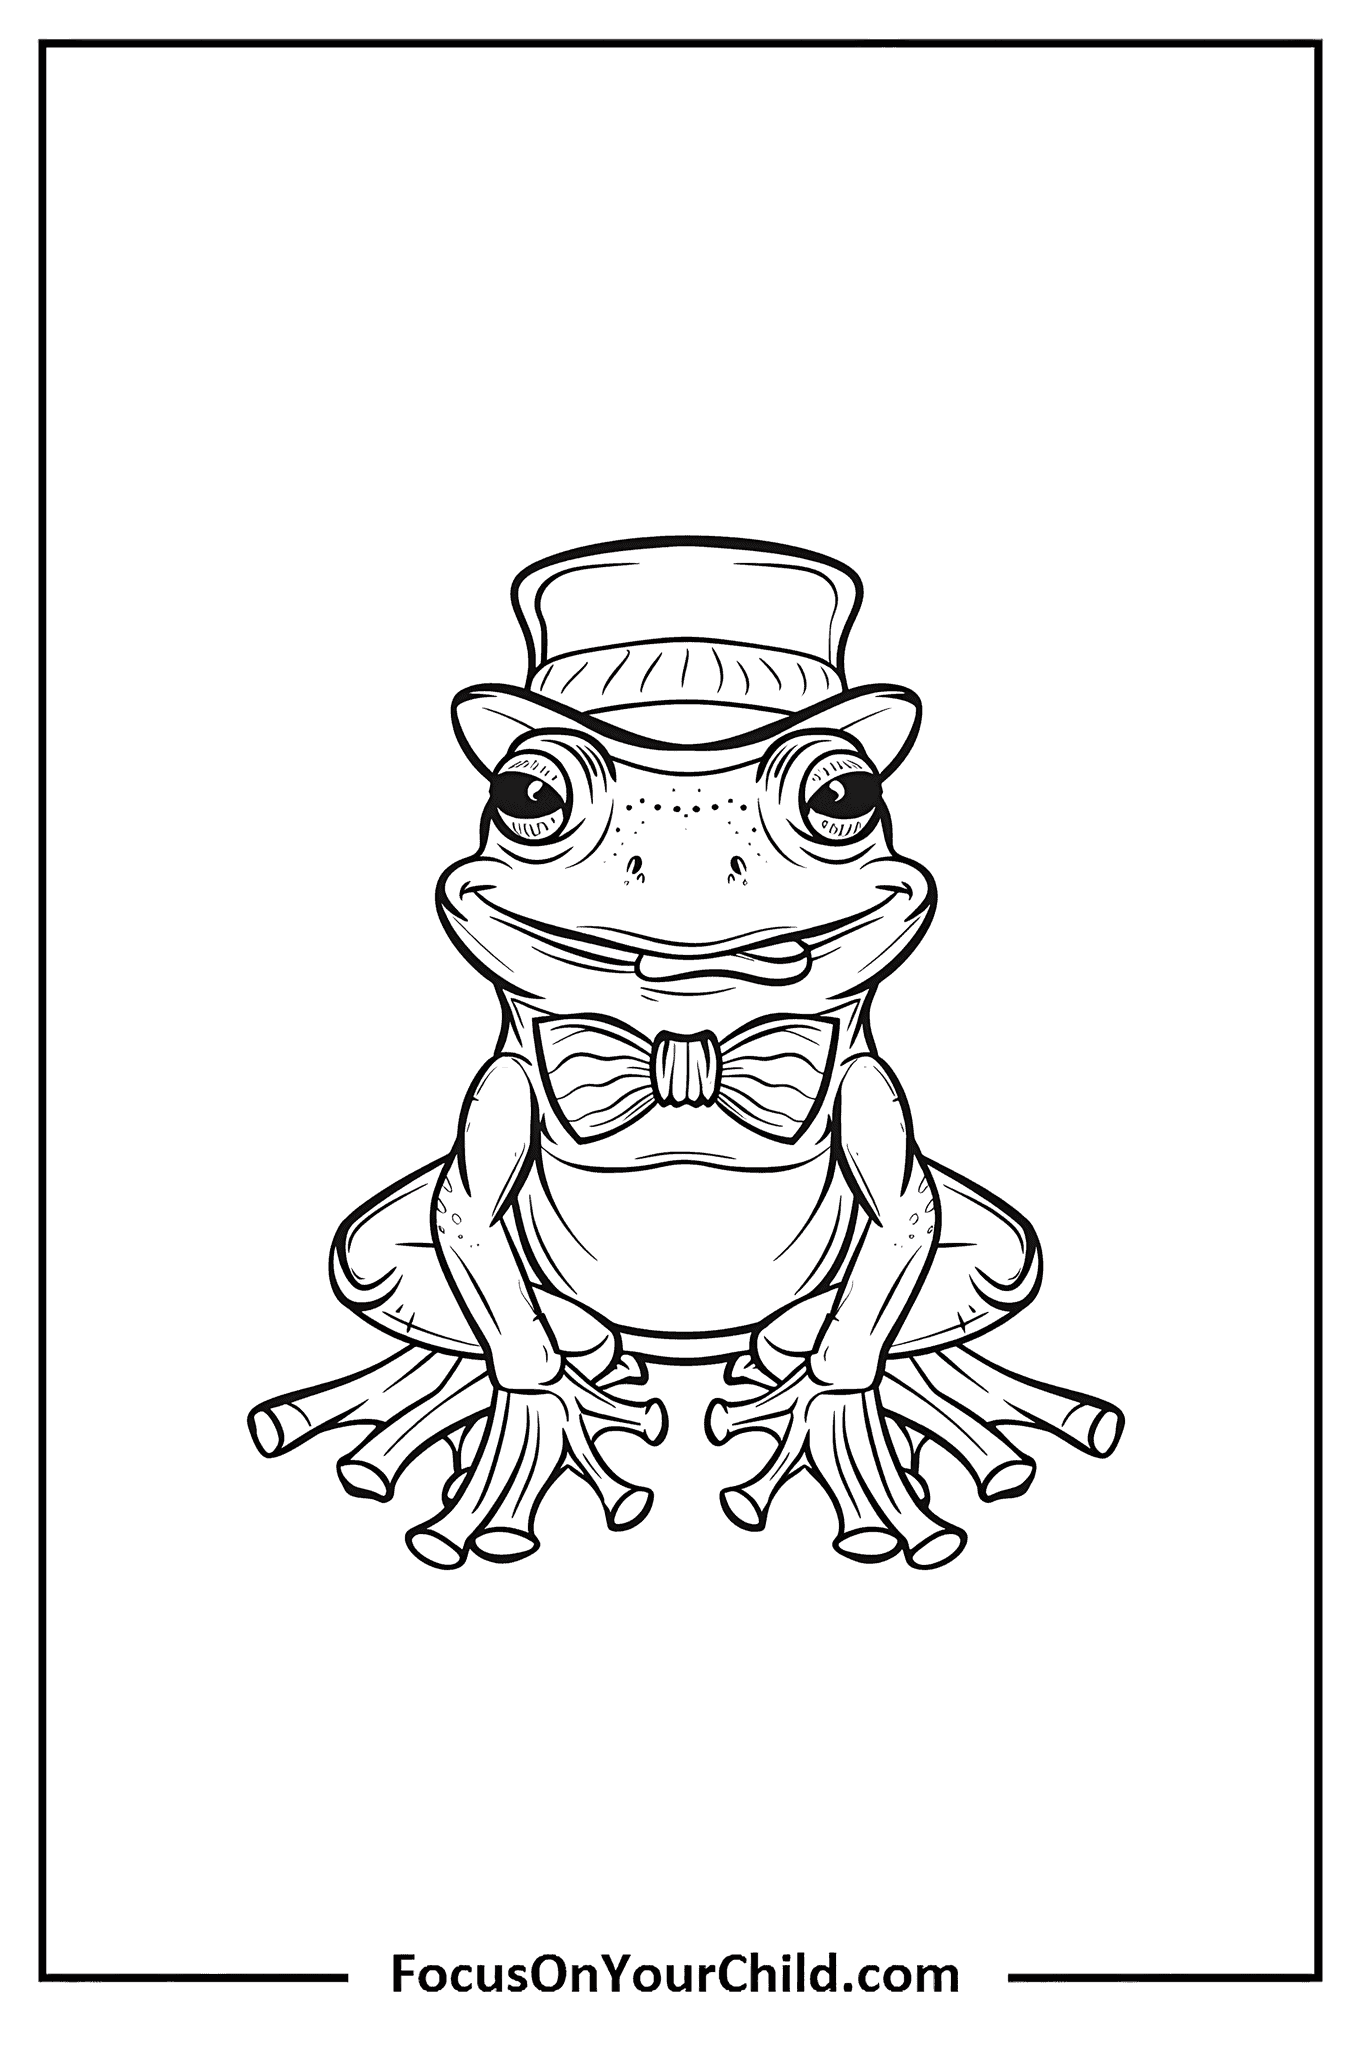 Anthropomorphized frog in top hat and bow tie, sitting elegantly with human-like features.